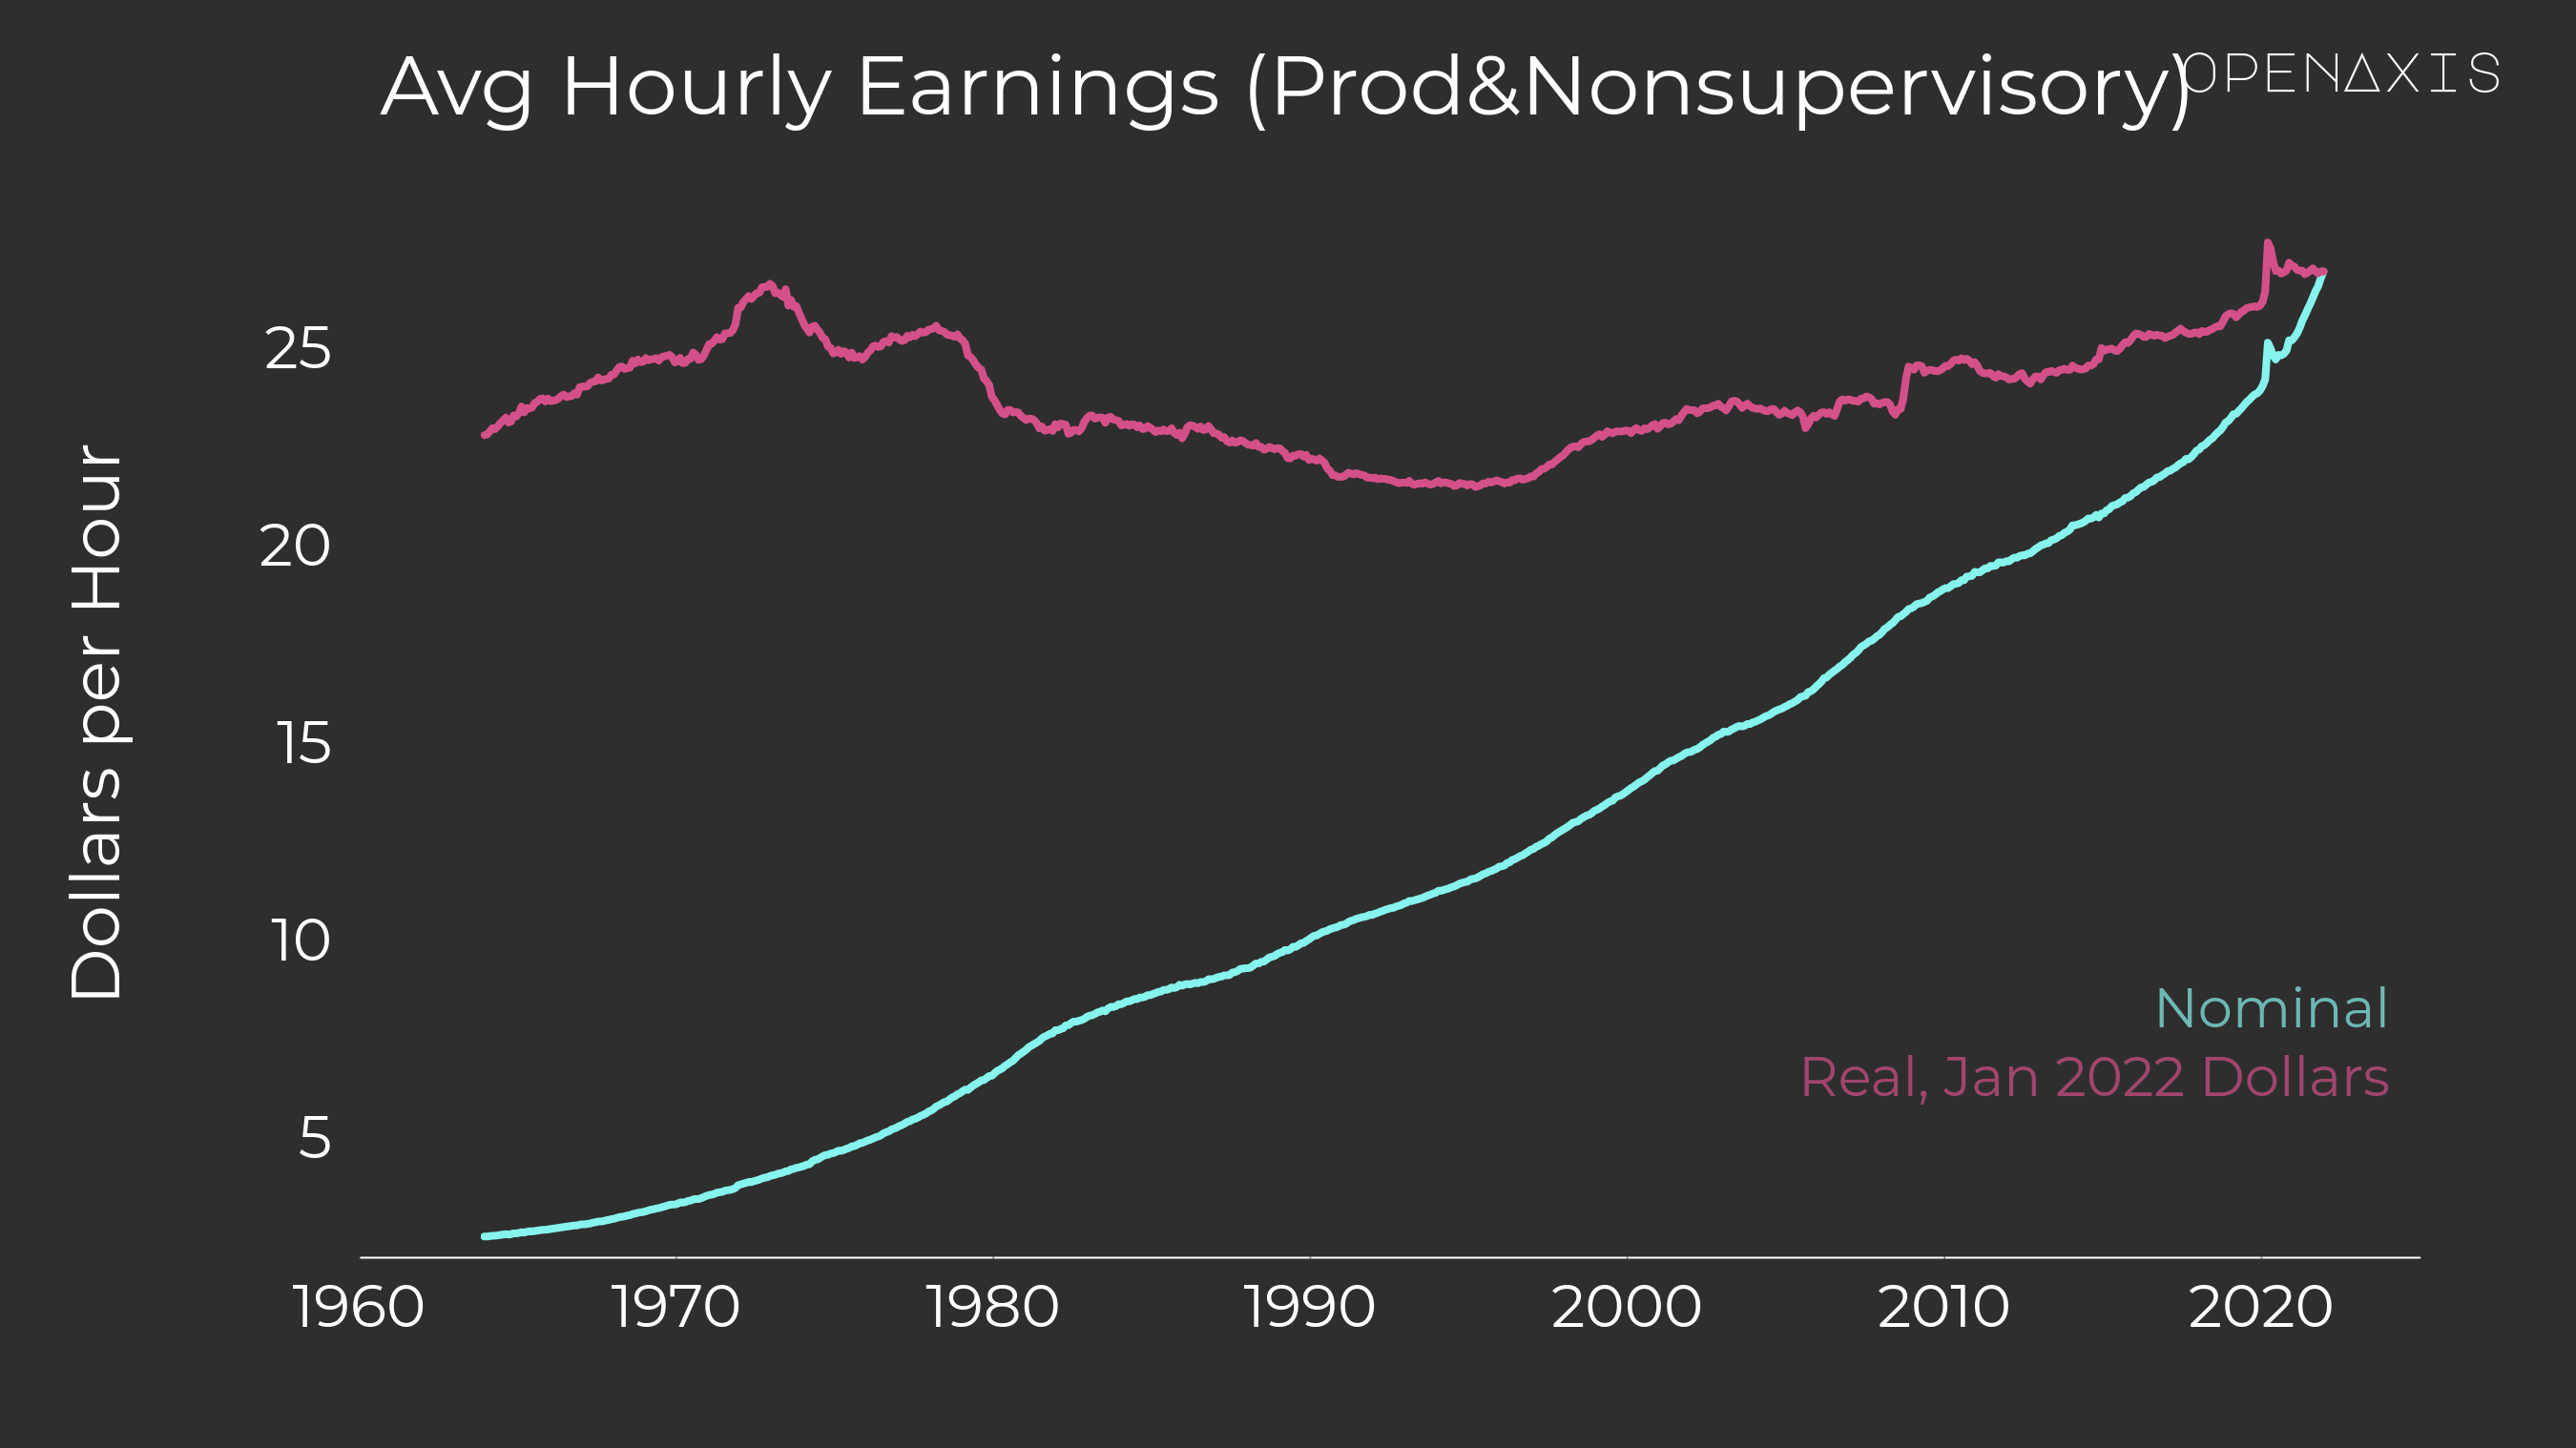 <p>In real terms, Average Hourly Earnings have been trending up since the mid-90's.</p><p>﻿<a href="/search?q=%23economy" target="_self">#economy</a>﻿ ﻿<a href="/search?q=%23sotu" target="_self">#sotu</a>﻿ ﻿<a href="/search?q=%23fred" target="_self">#fred</a>﻿ </p><p><br /></p><p><a href="https://app.openaxis.com/projects/openaxis/State-of-the-Union-2022" target="_blank">Return to State of the Union 2022 project by OpenAxis</a>﻿</p>